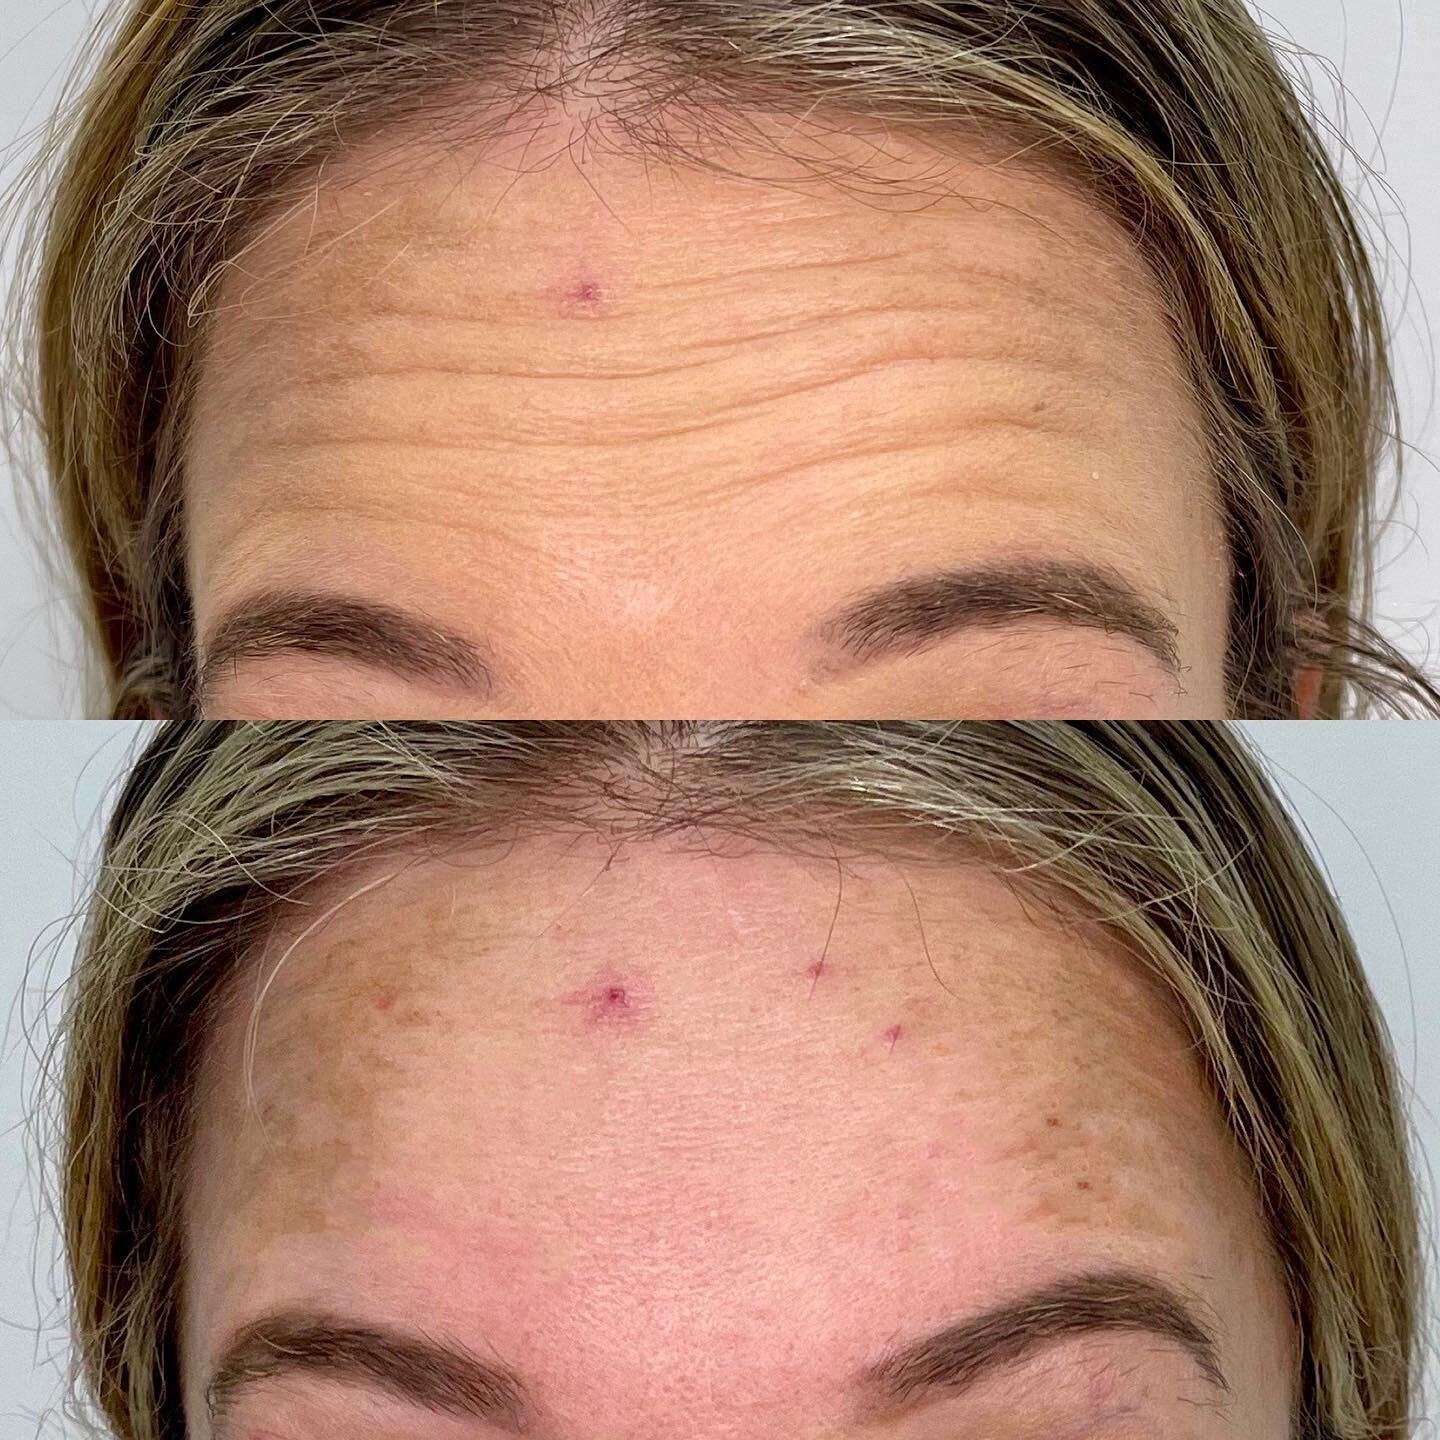 One of our beautiful clients looking smooth and refreshed after her anti-wrinkle treatment to the forehead area 💗💉

The client is raising her eyebrows in both photos.